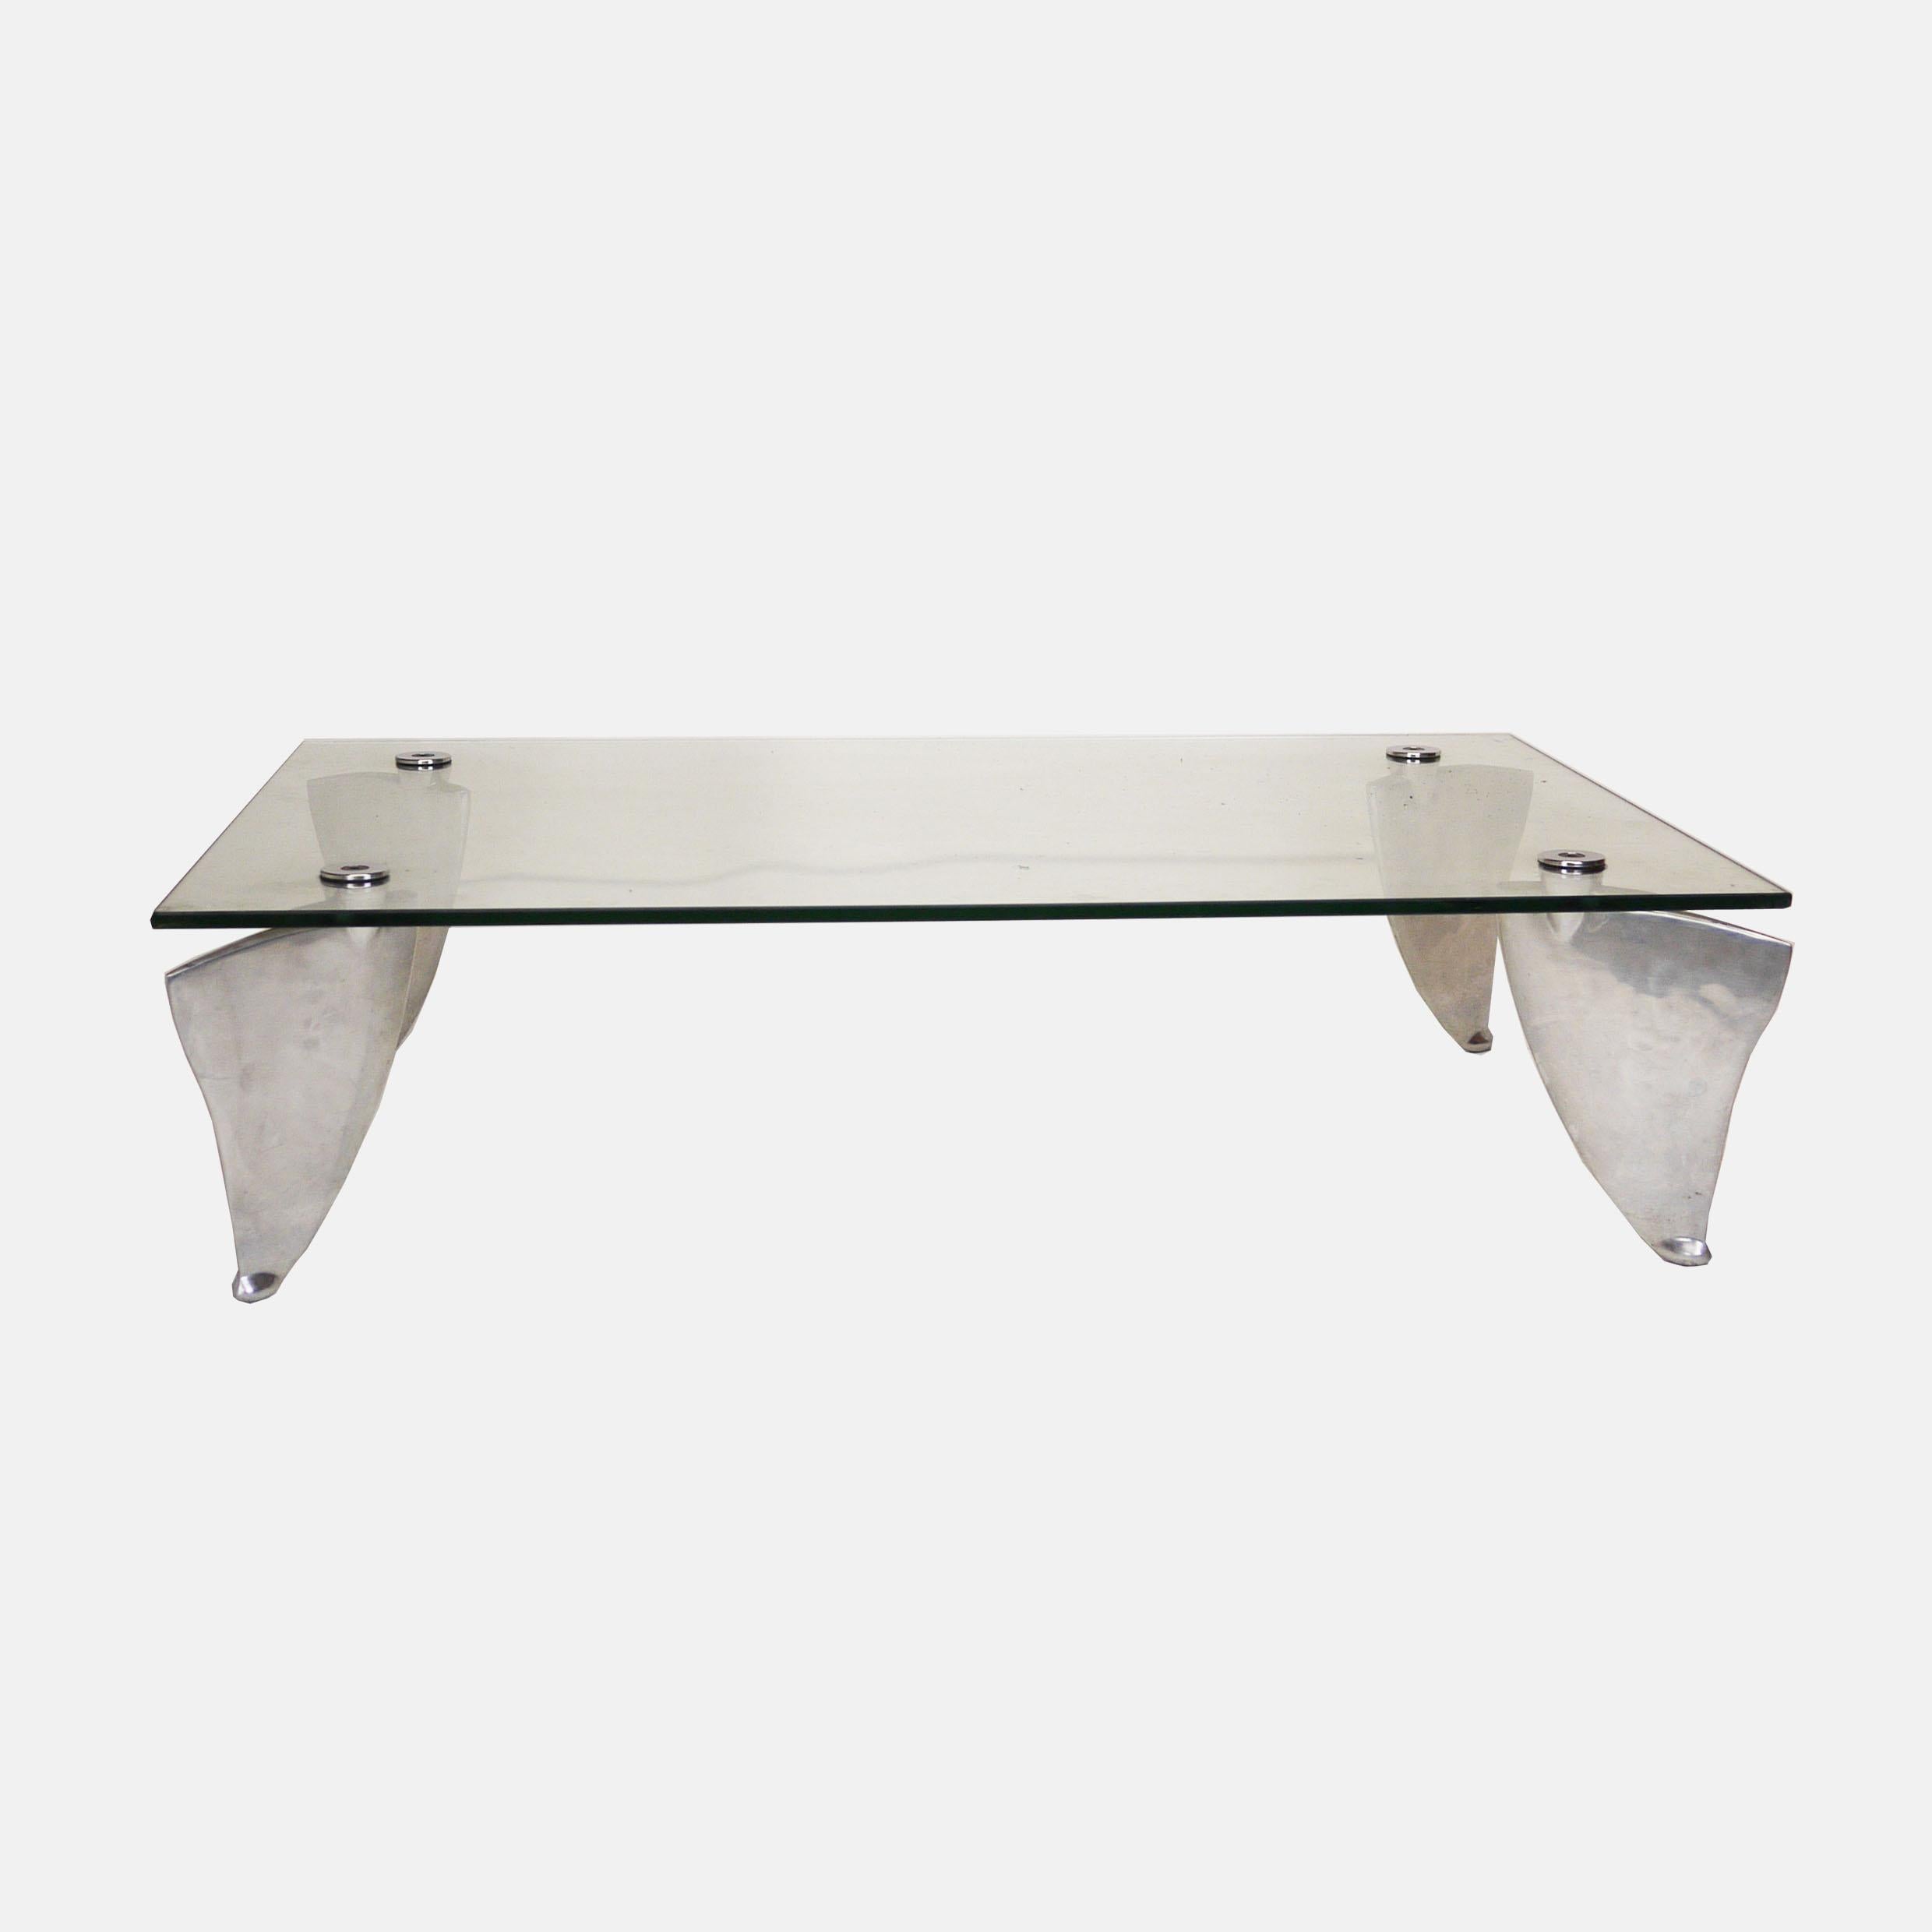 A vintage rectangular coffee table in glass and aluminium.

Designer - Matthew Hilton

Manufacturer - SCP

Design Period - 1980 to 1989

Detailed Condition - Good with minimal defects.

Restoration and Damage Details - Light wear consistent with age